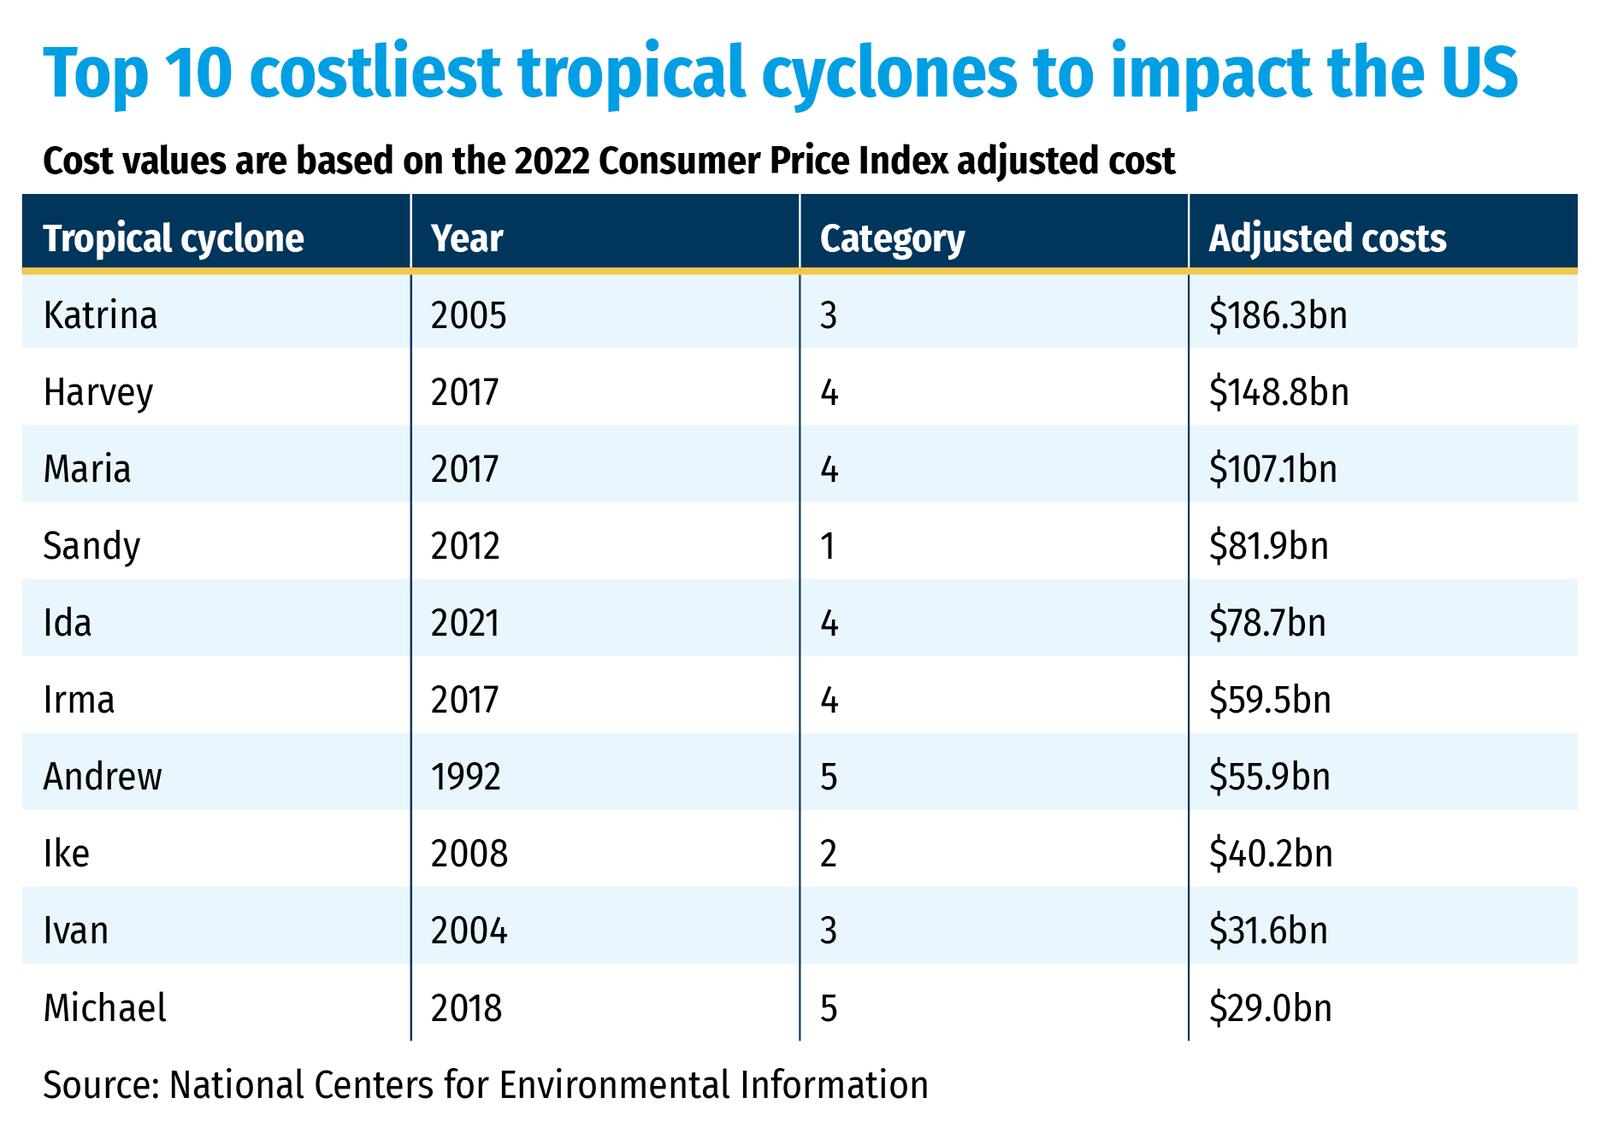 Top 10 costliest tropical cyclones to impact the US